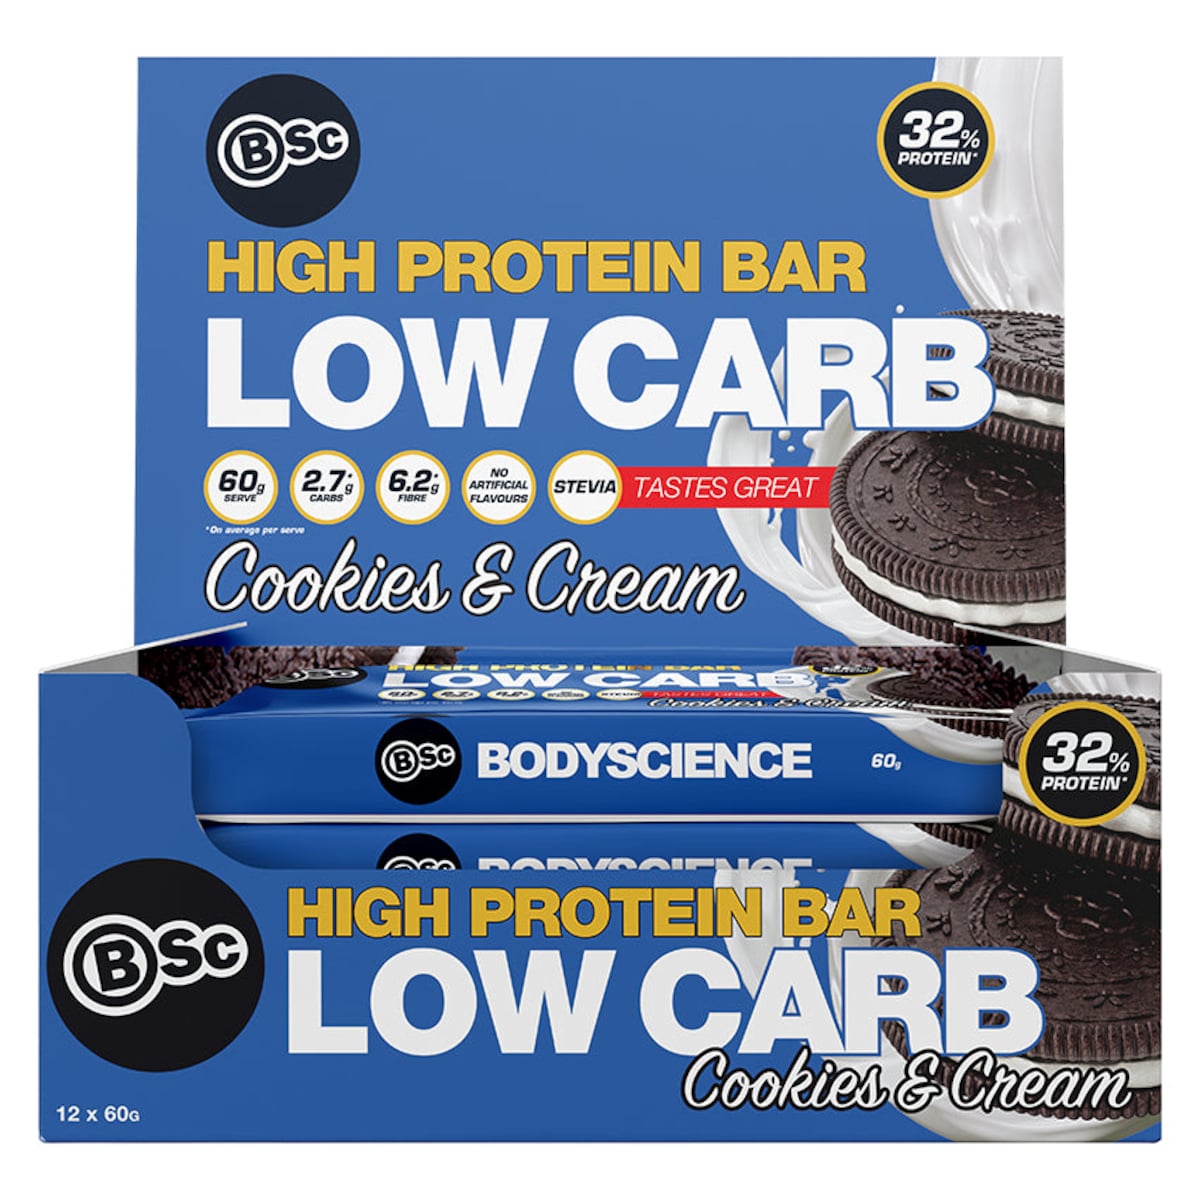 BSc Body Science High Protein Low Carb Bar Cookies & Cream 12 x